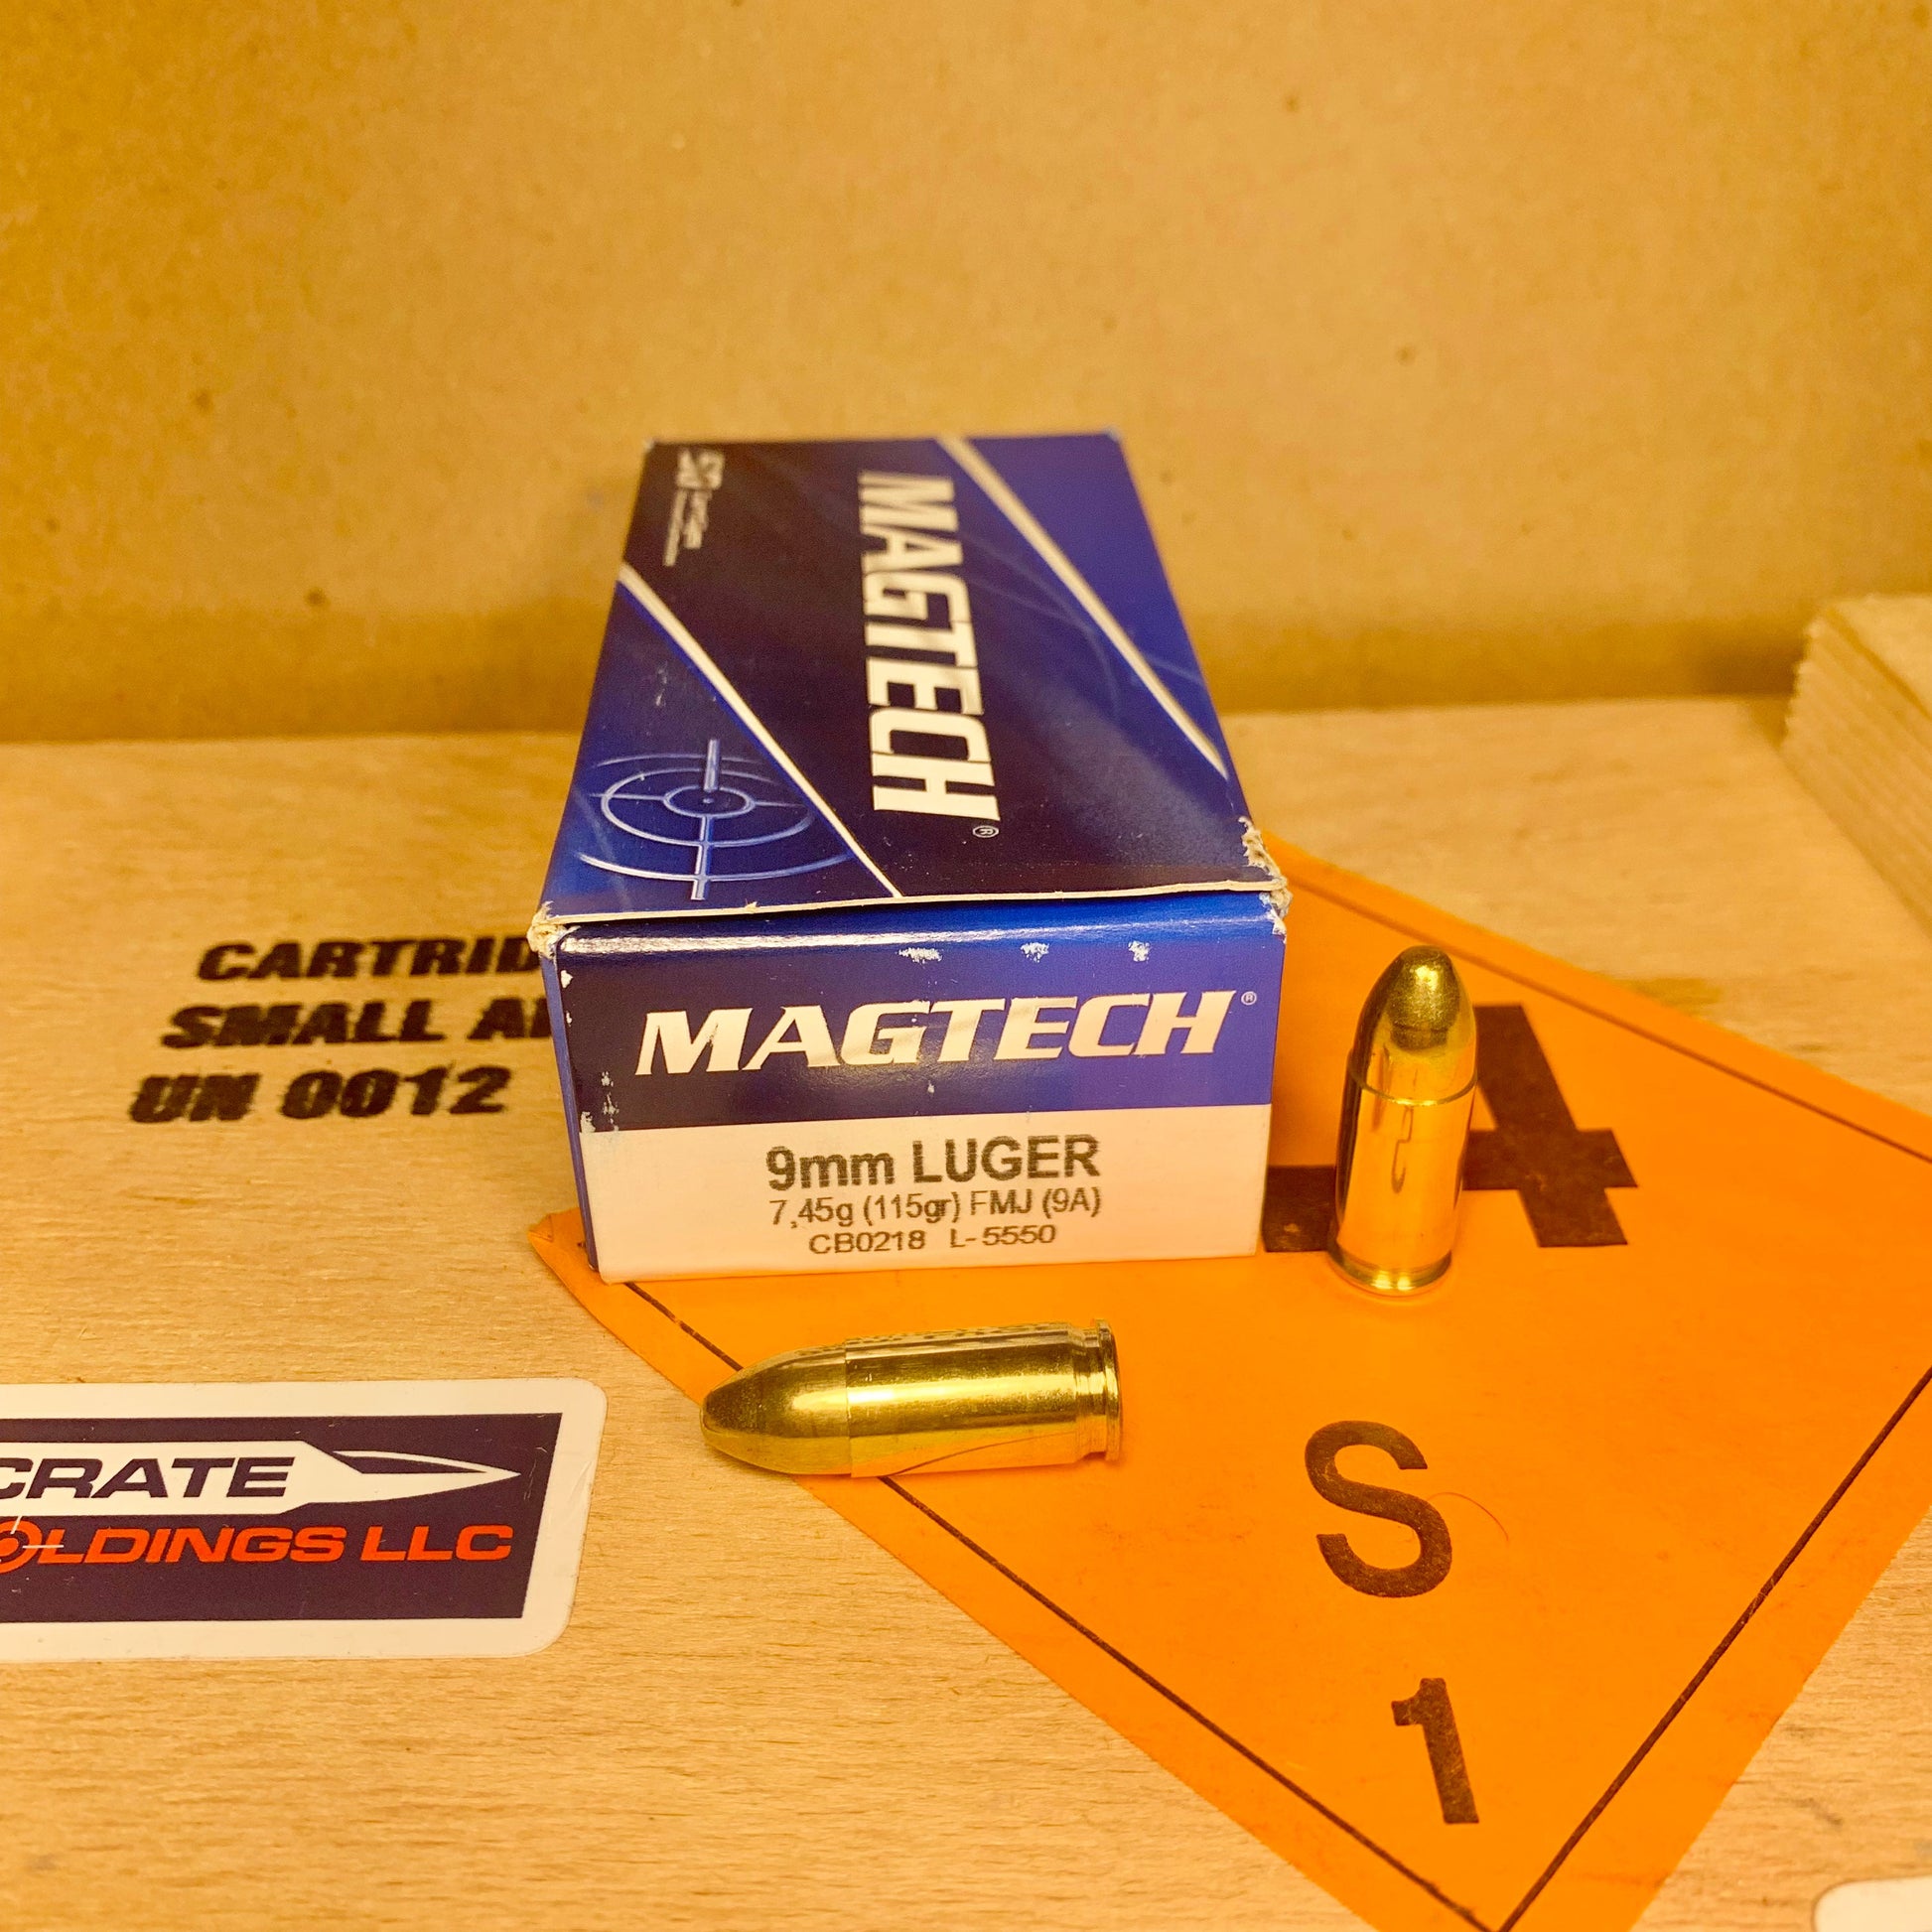 Free Shipping - 1000 Round Case Magtech 9mm Luger Ammo 115gr FMJ MG9A